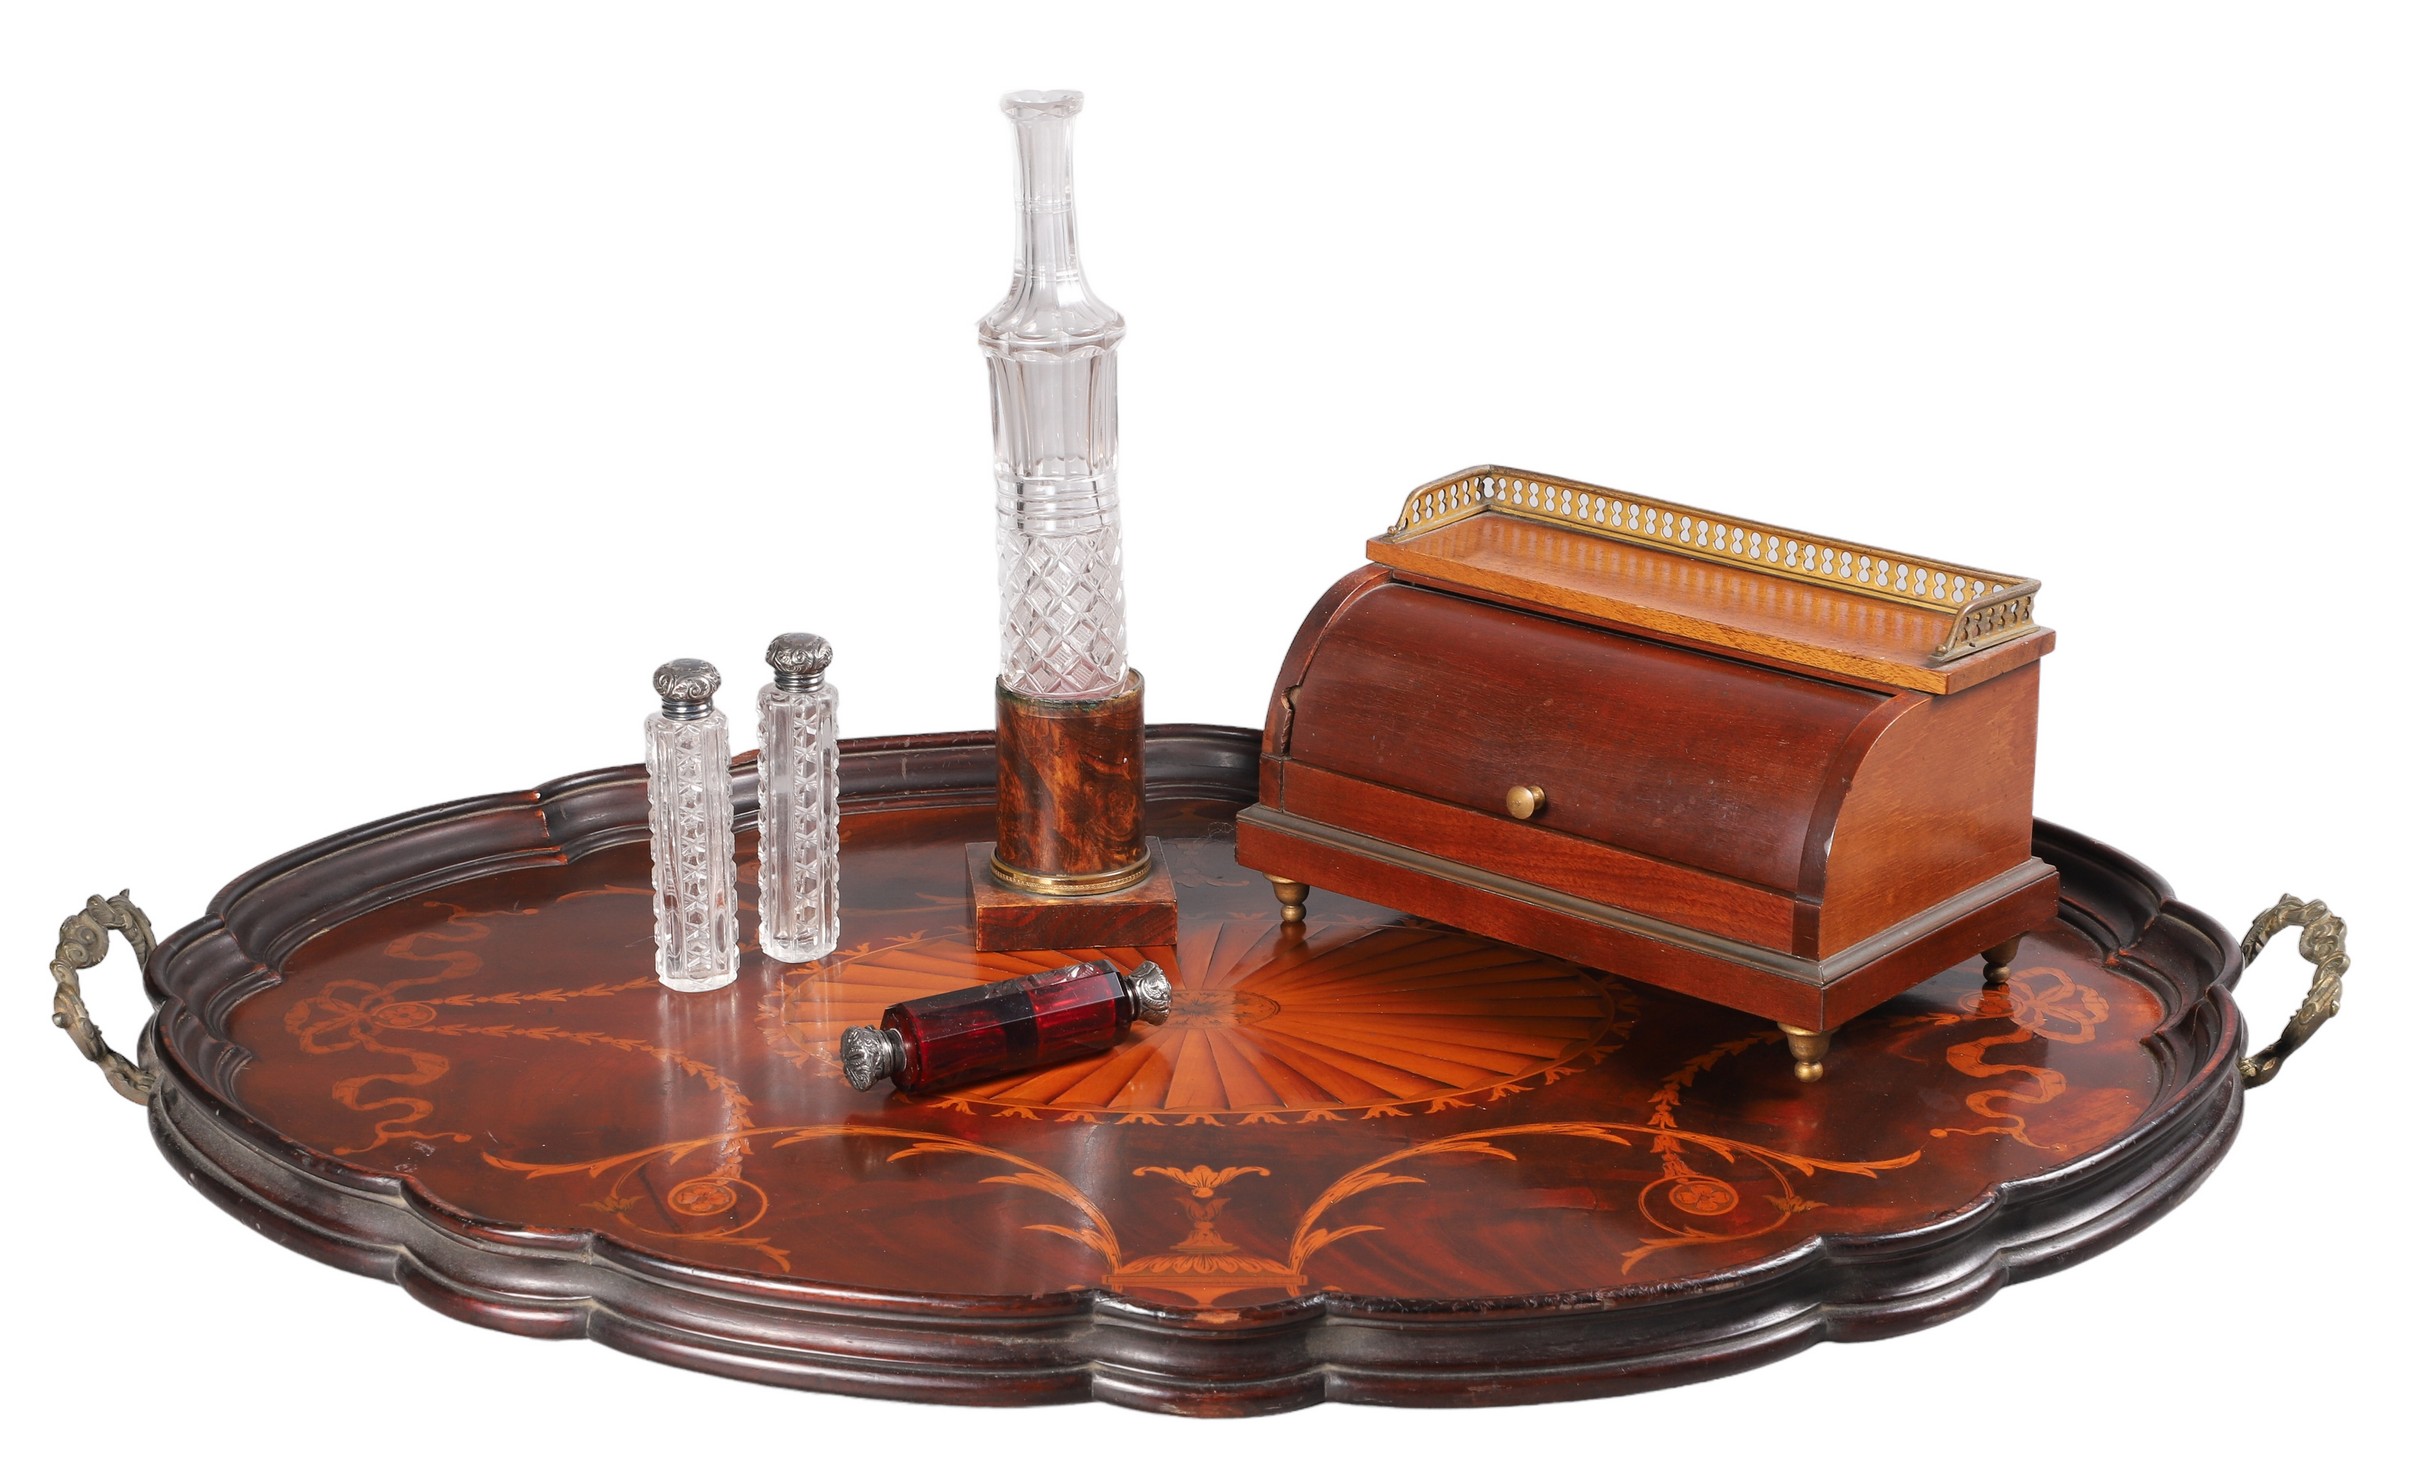 Inkstand tray and assorted bottles 2e0cbd